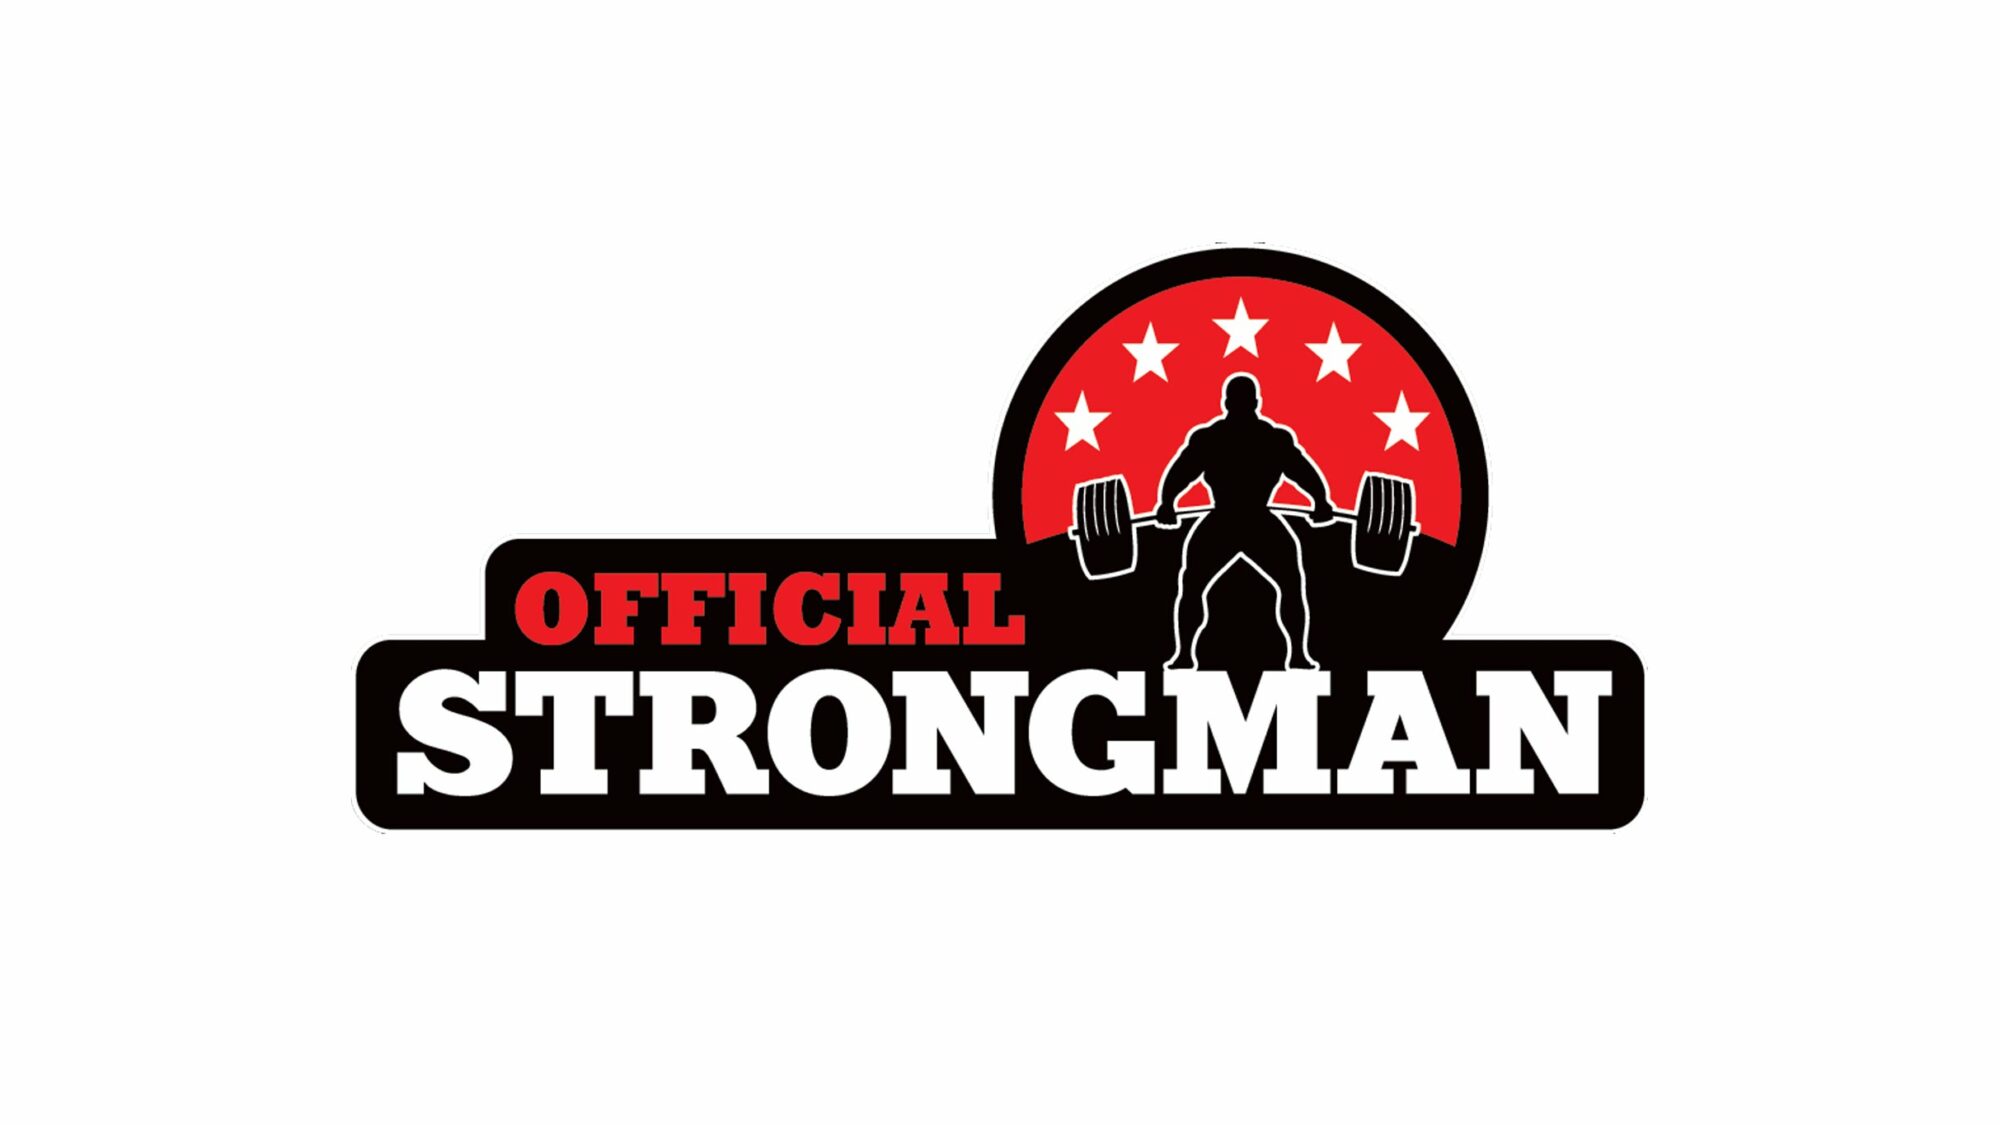 Image name Official Strongman European Championships Weekend Ticket at York Barbican York the 22 image from the post Events in Yorkshire.com.